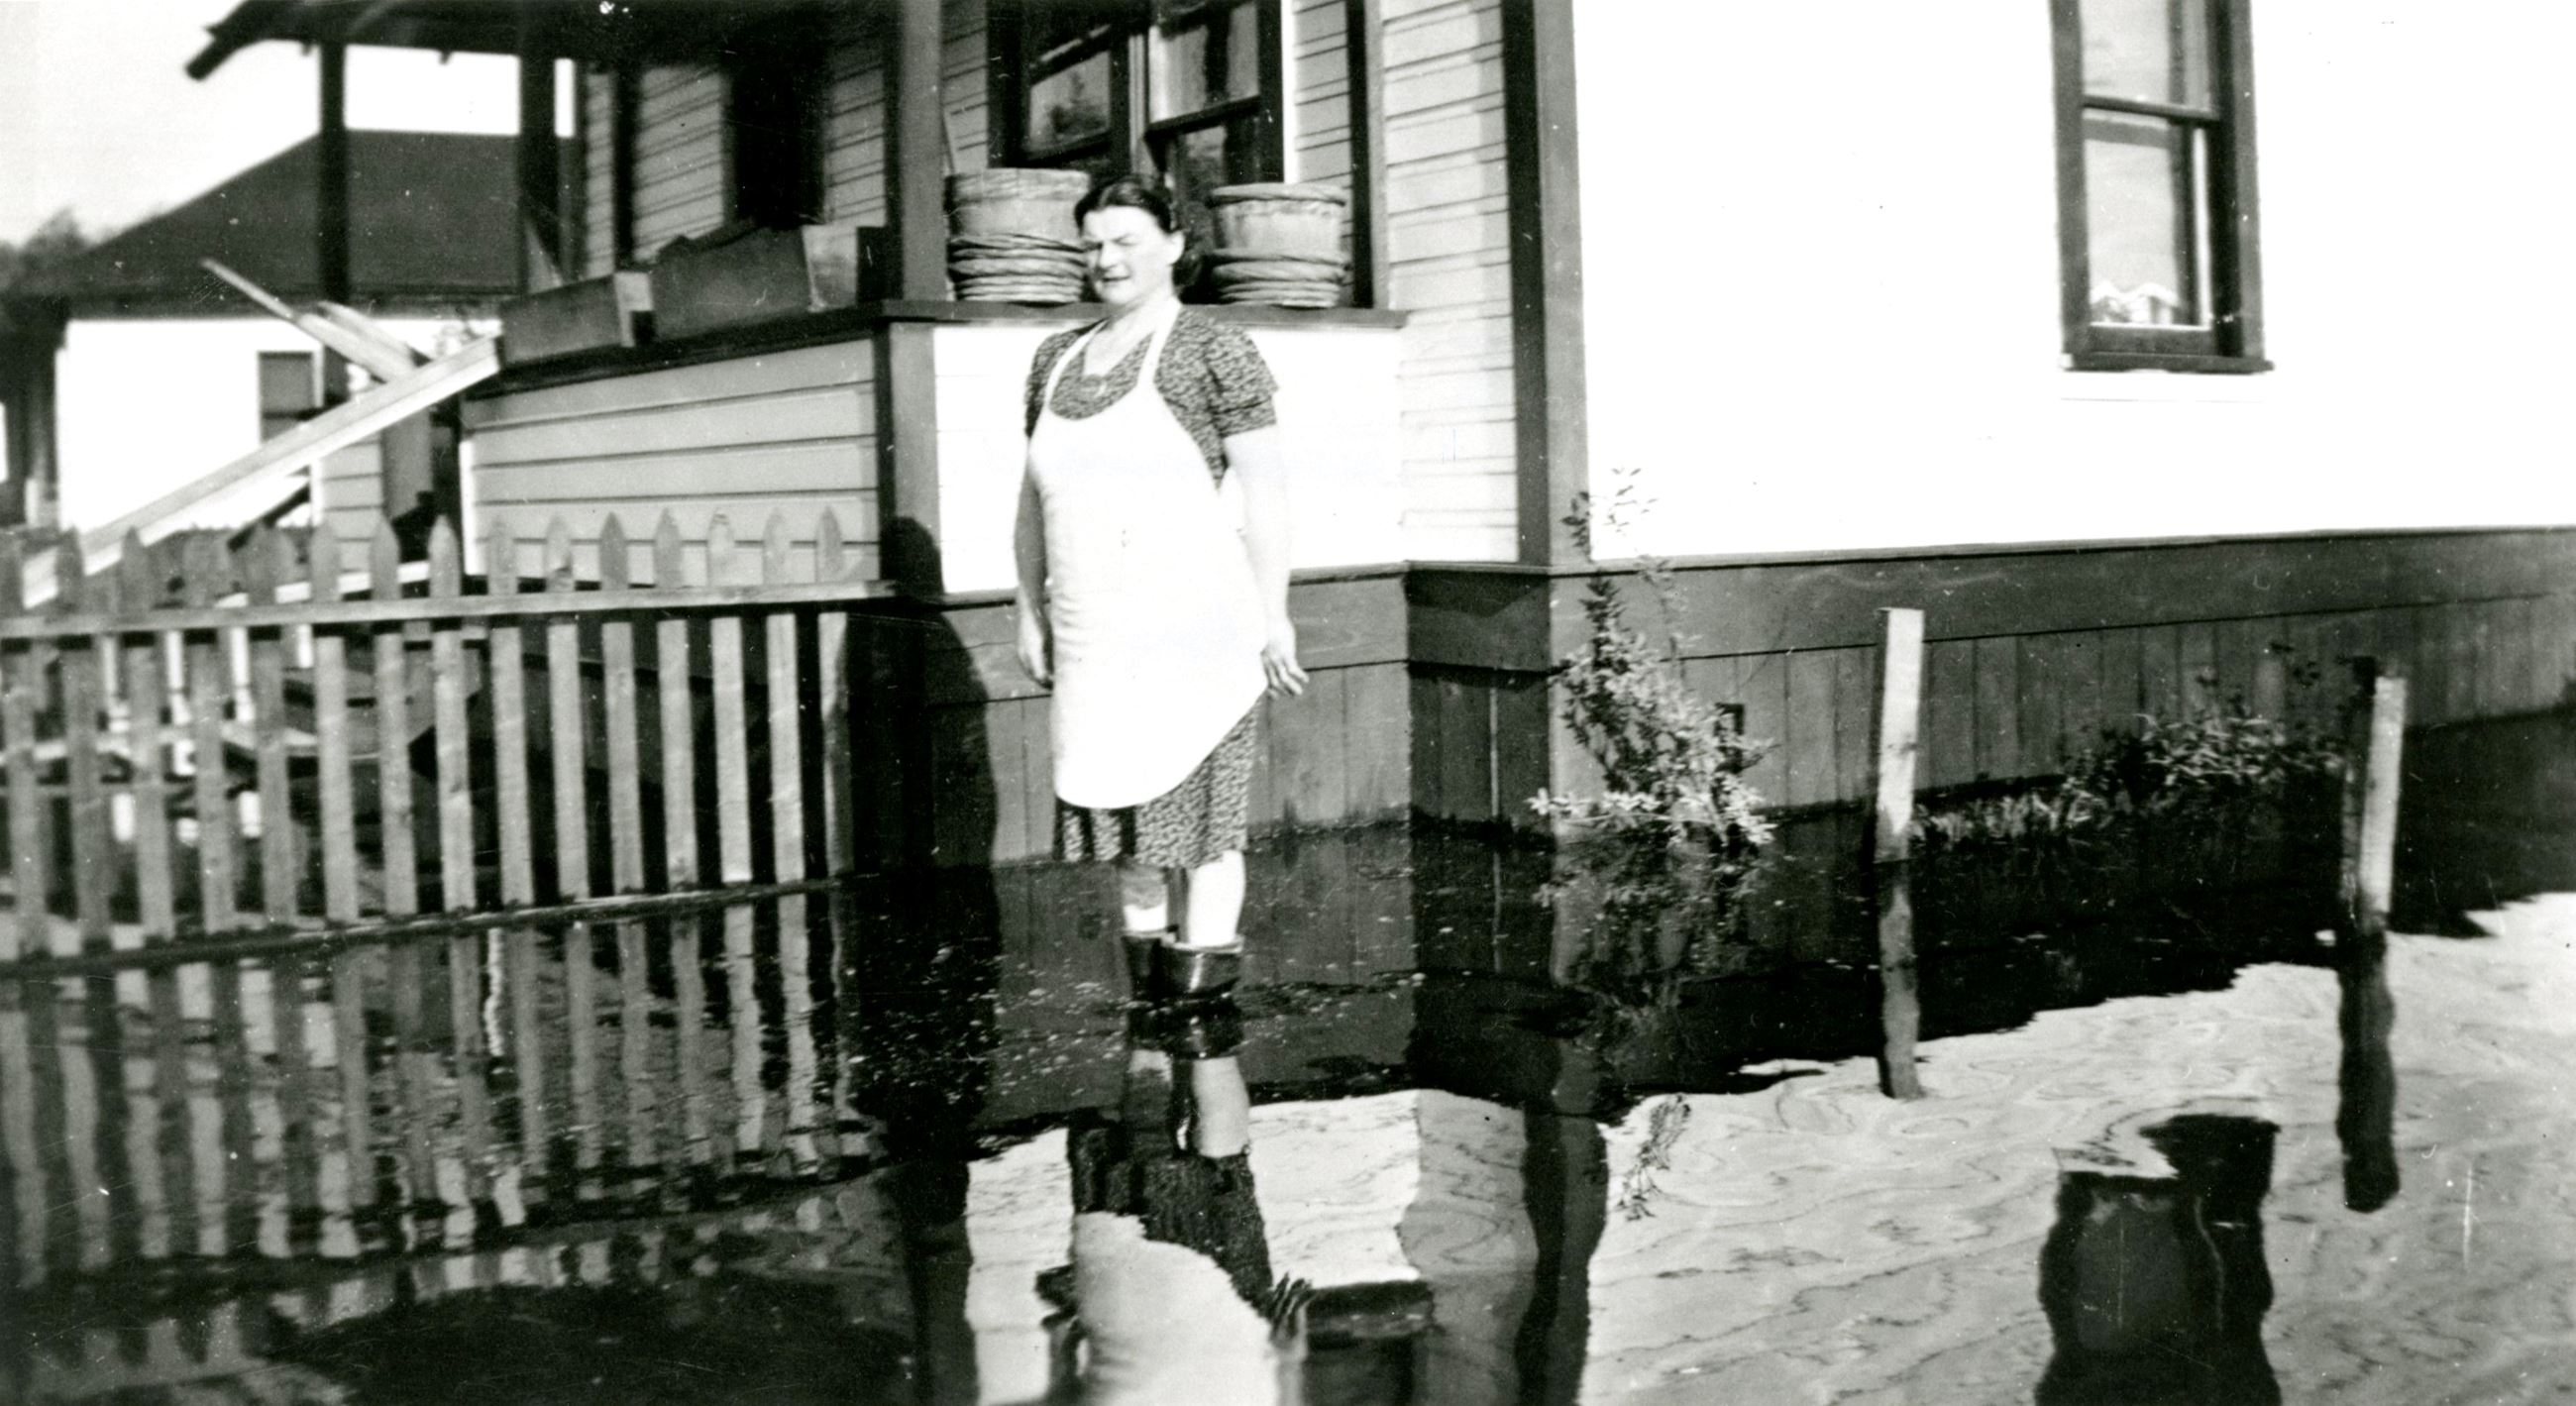 Mrs. Borghild Locken outside her home during the 1948 flood (Source City of Coquitlam Archives, C6.1 Opens in new window